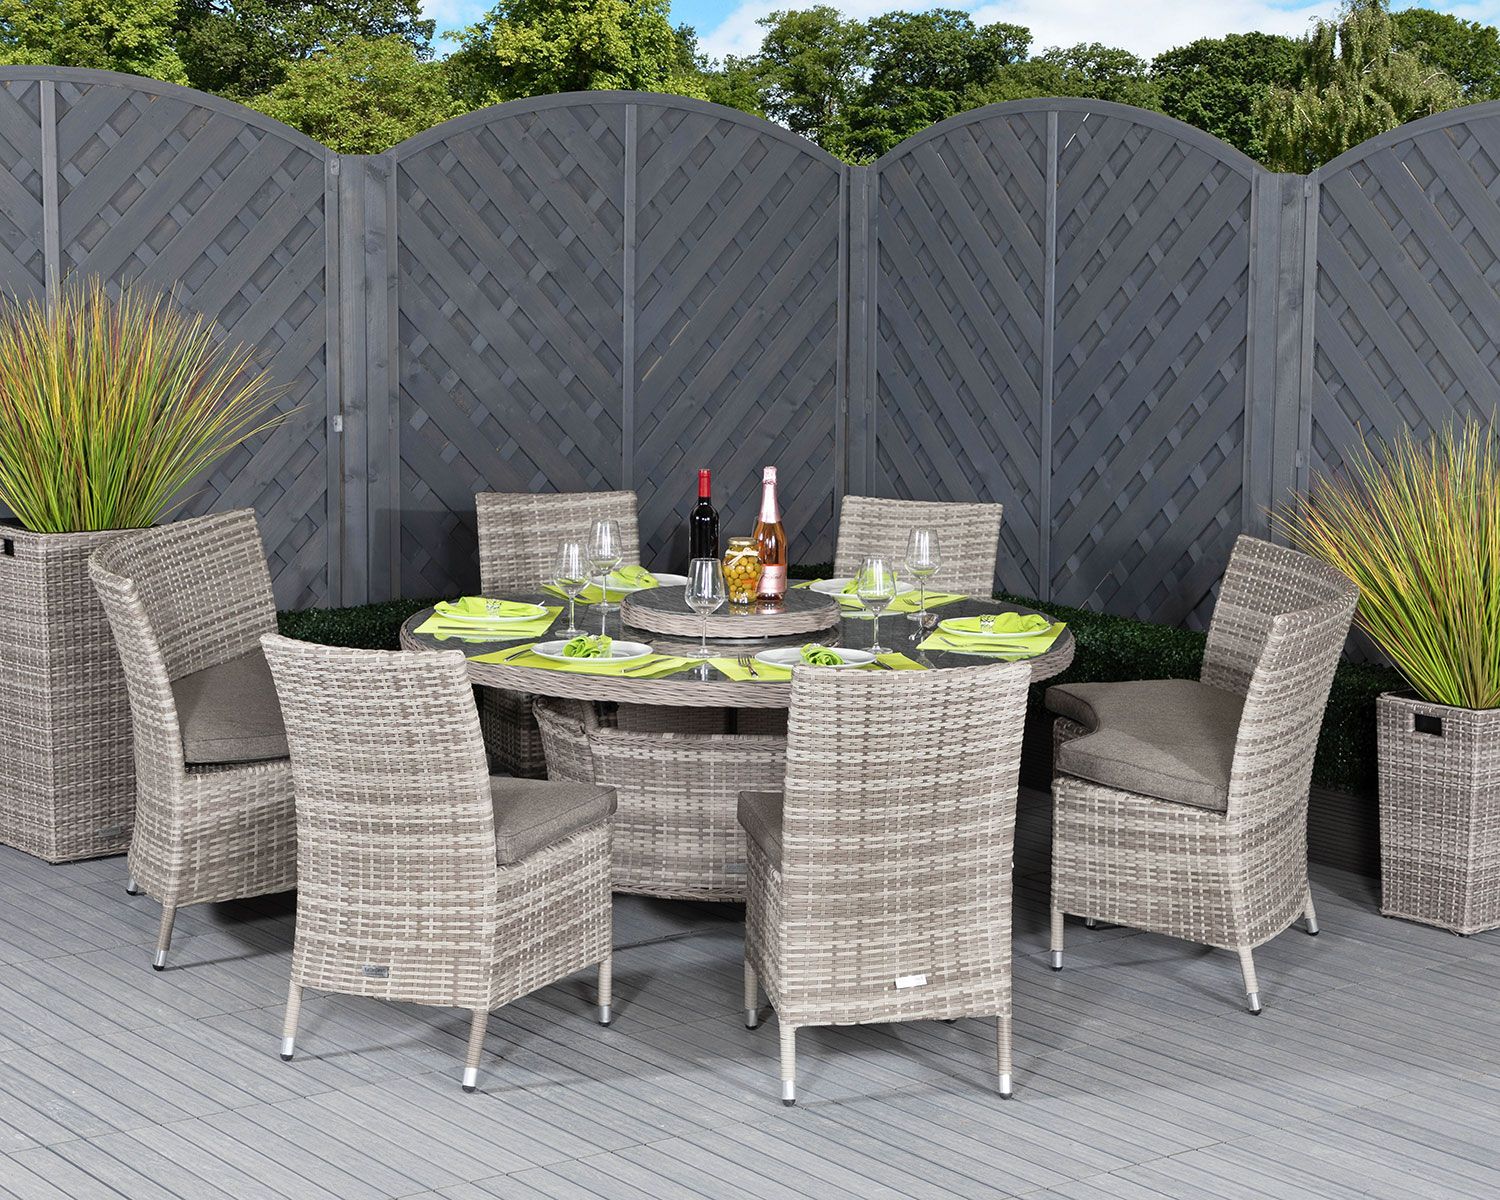 Rattan Garden Dining Set In Grey – Oxford – Rattan Garden Furniture Pertaining To Distressed Gray Wicker Patio Dining Sets (View 9 of 15)